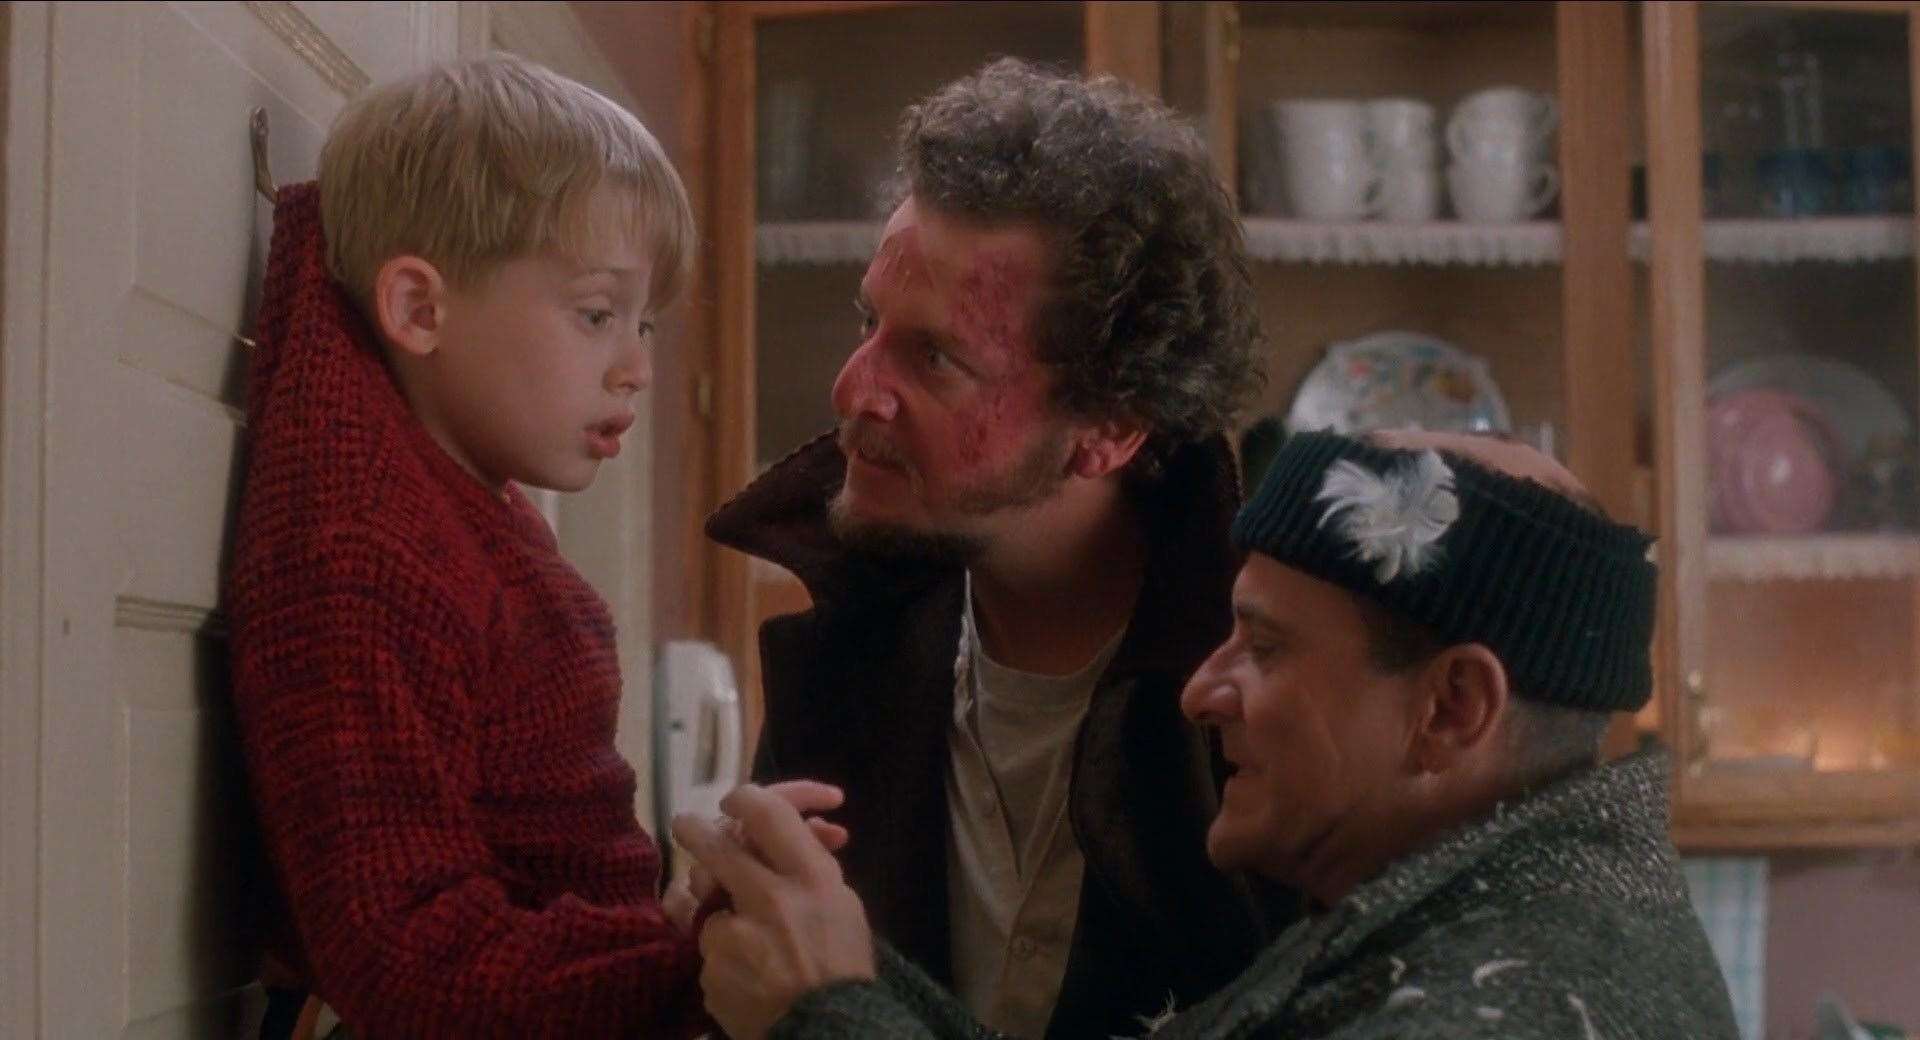 A screening of Home Alone will begin at 8pm